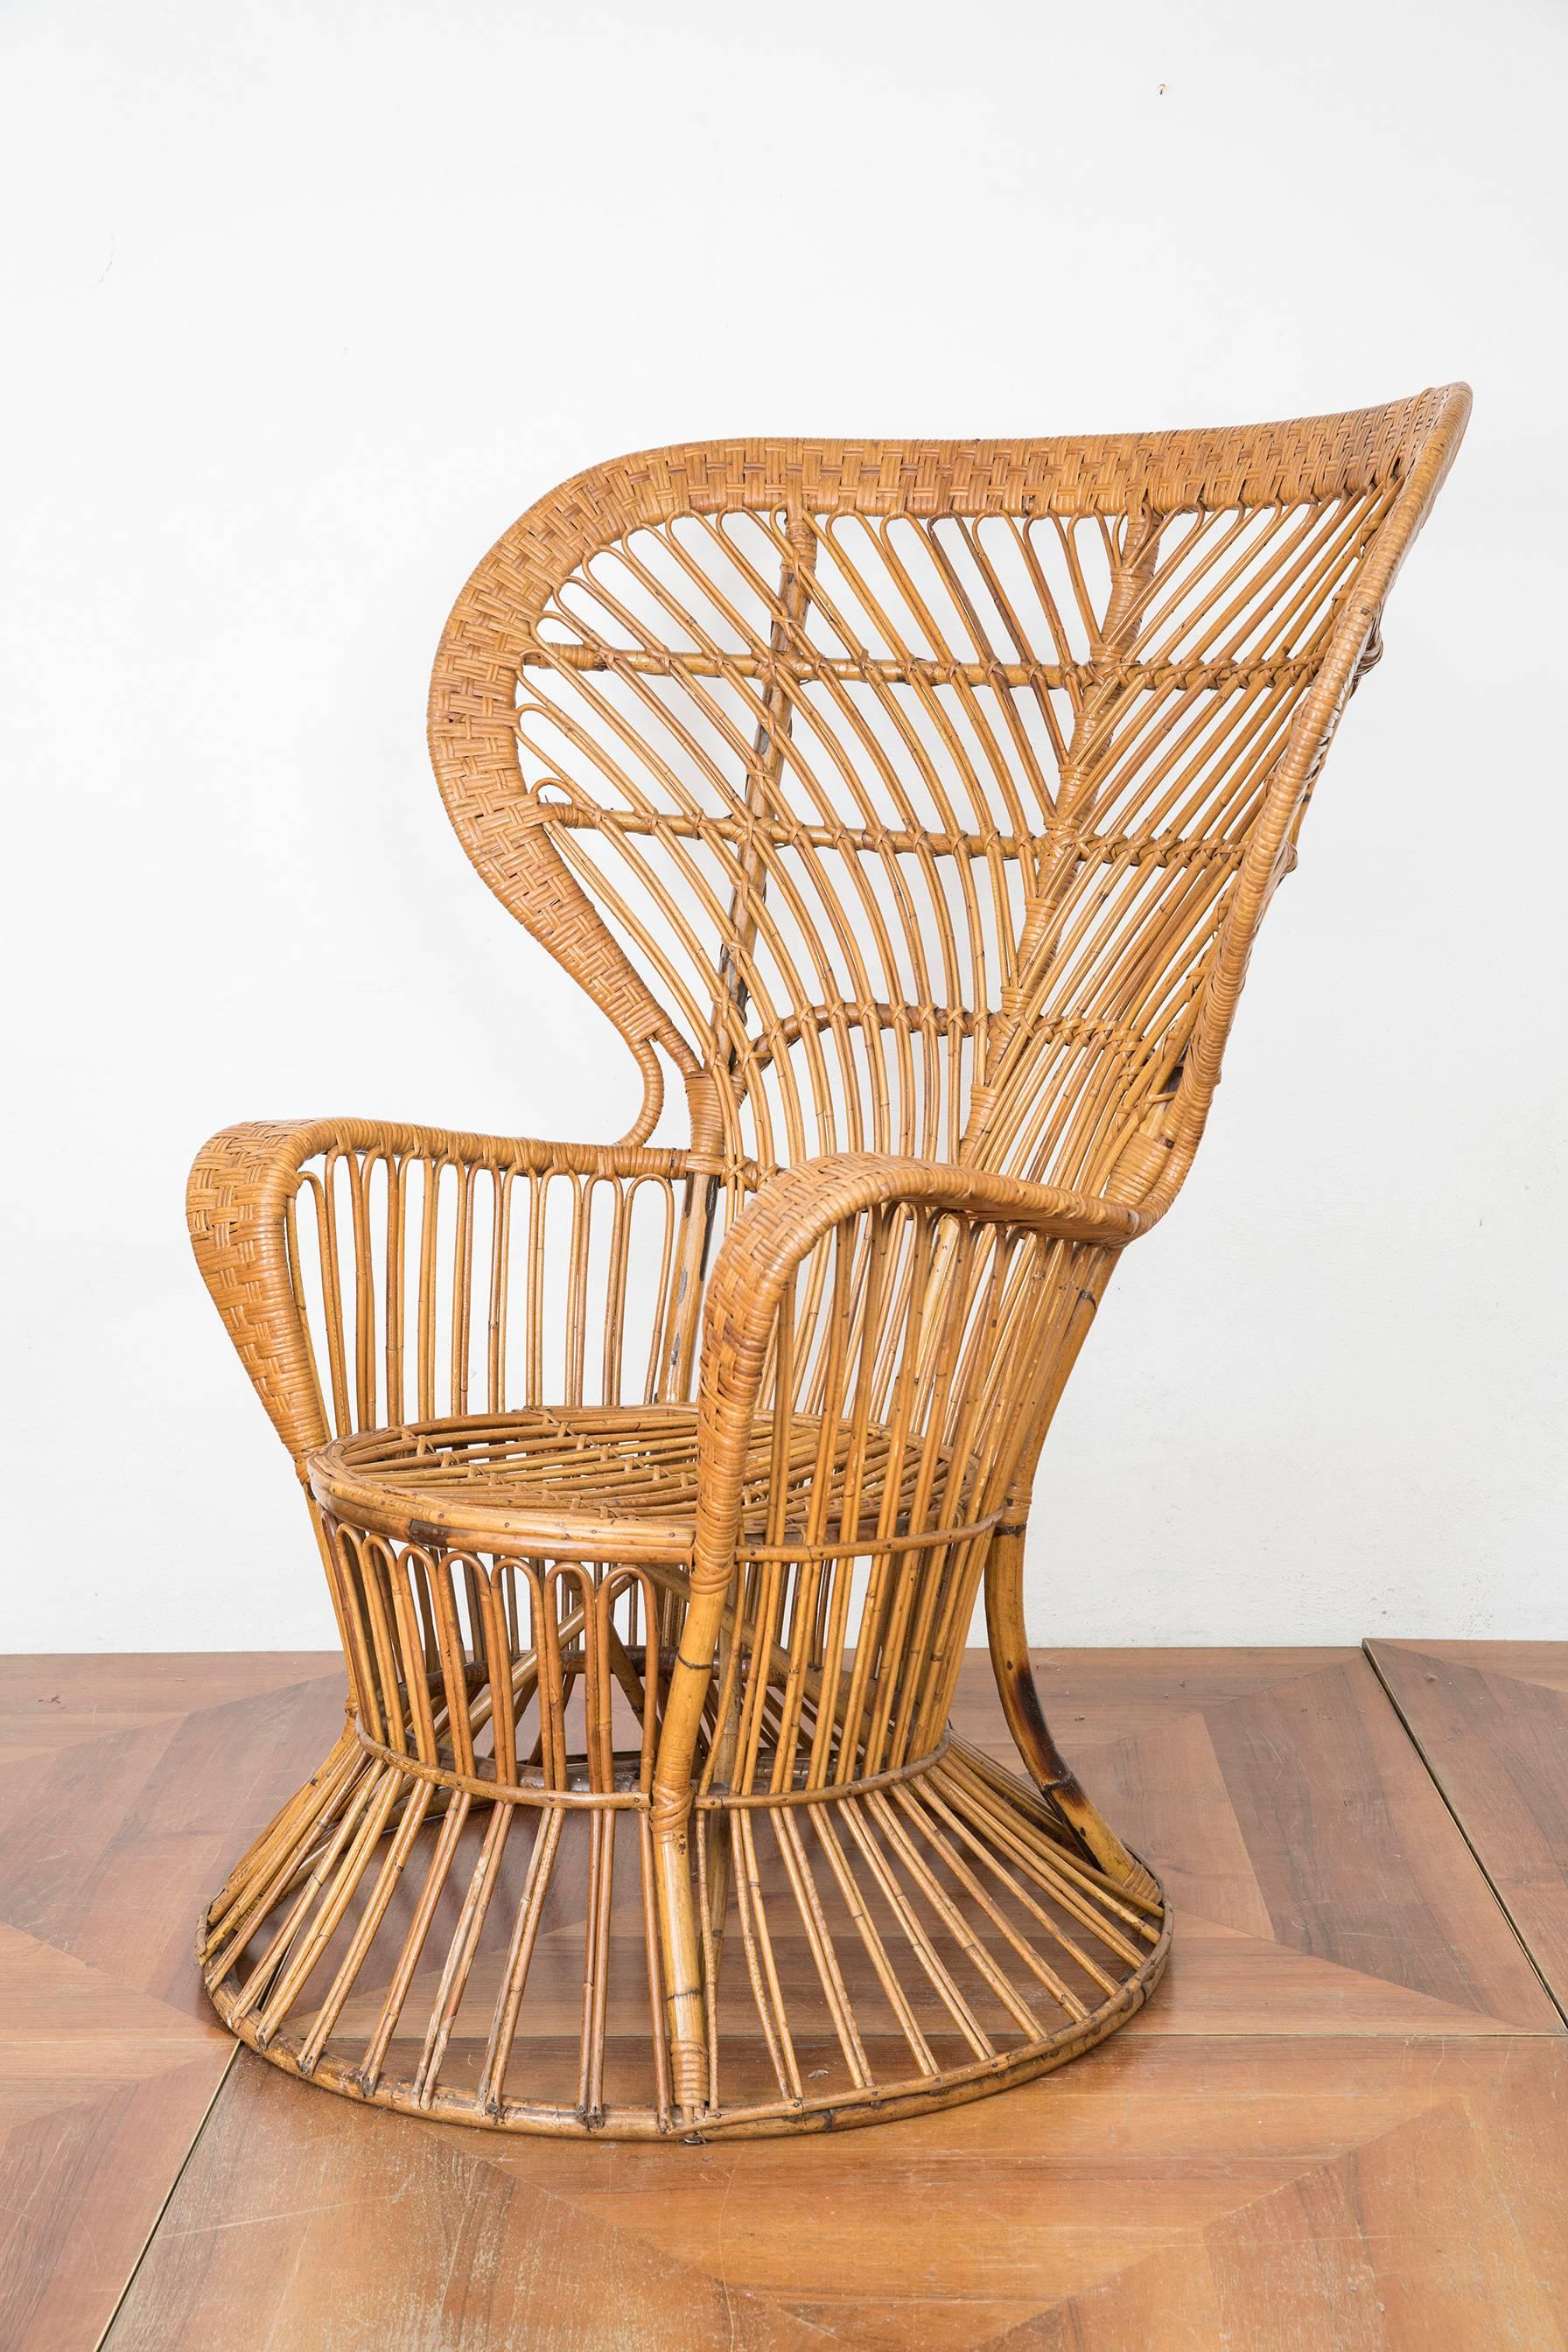 A wicker armchair designed by Lio Carminati produced by Bonacina. The armchairs were specifically designed for the prestigious cruise ship Conte Biancamano, Gio Ponti choose his former students fan chair to furnish part of the vessels interior.
The